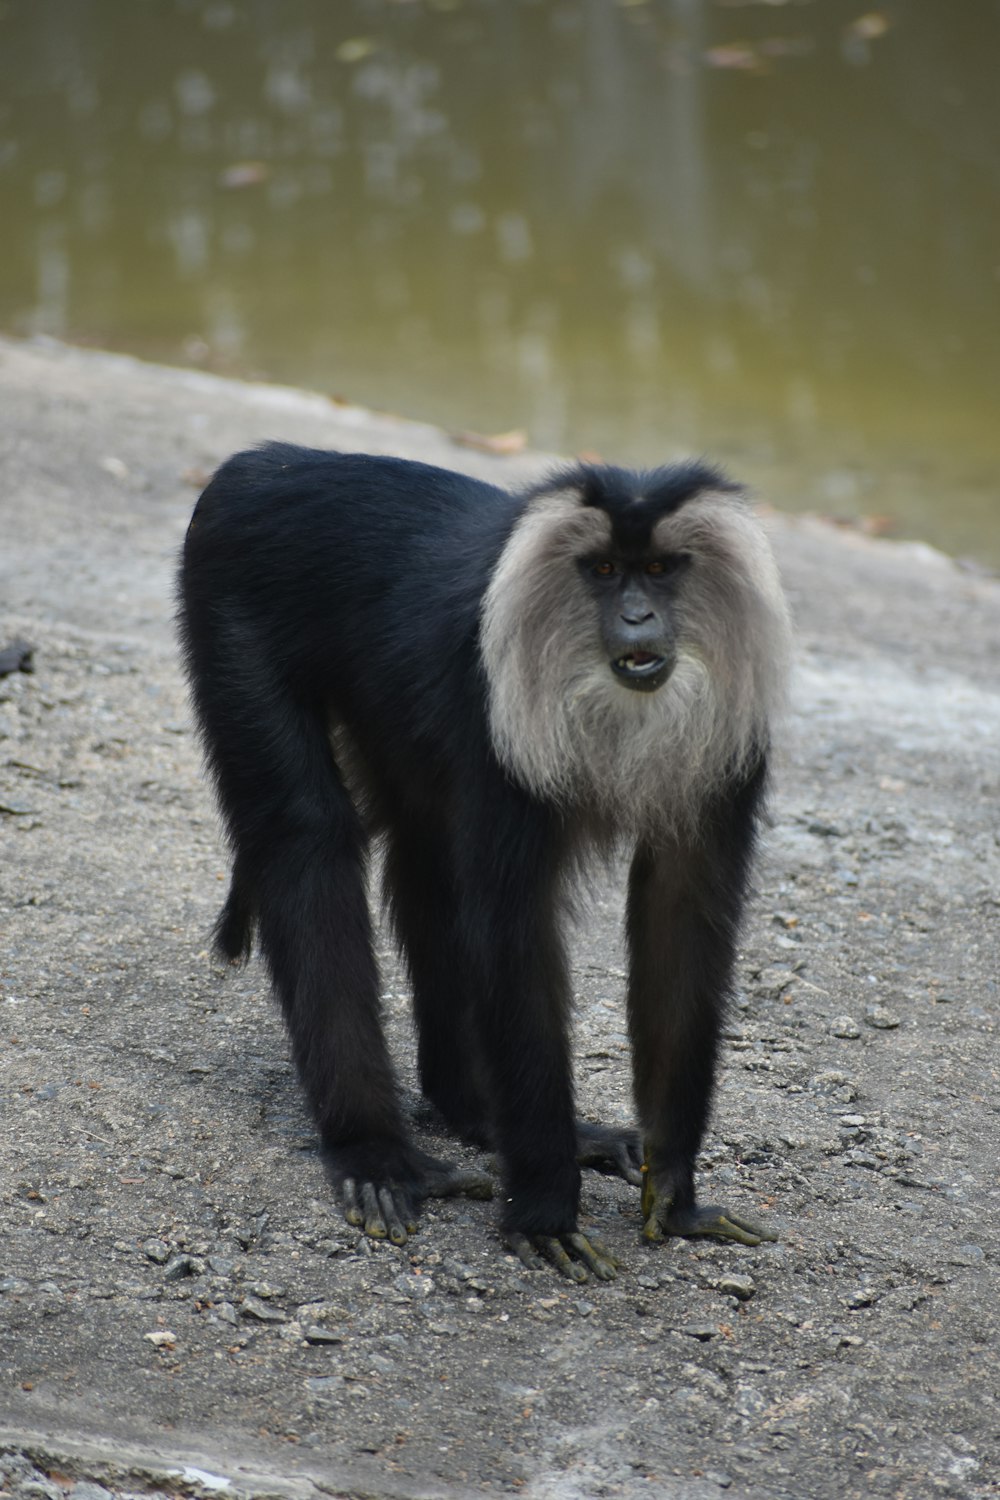 a monkey standing on the ground next to a body of water